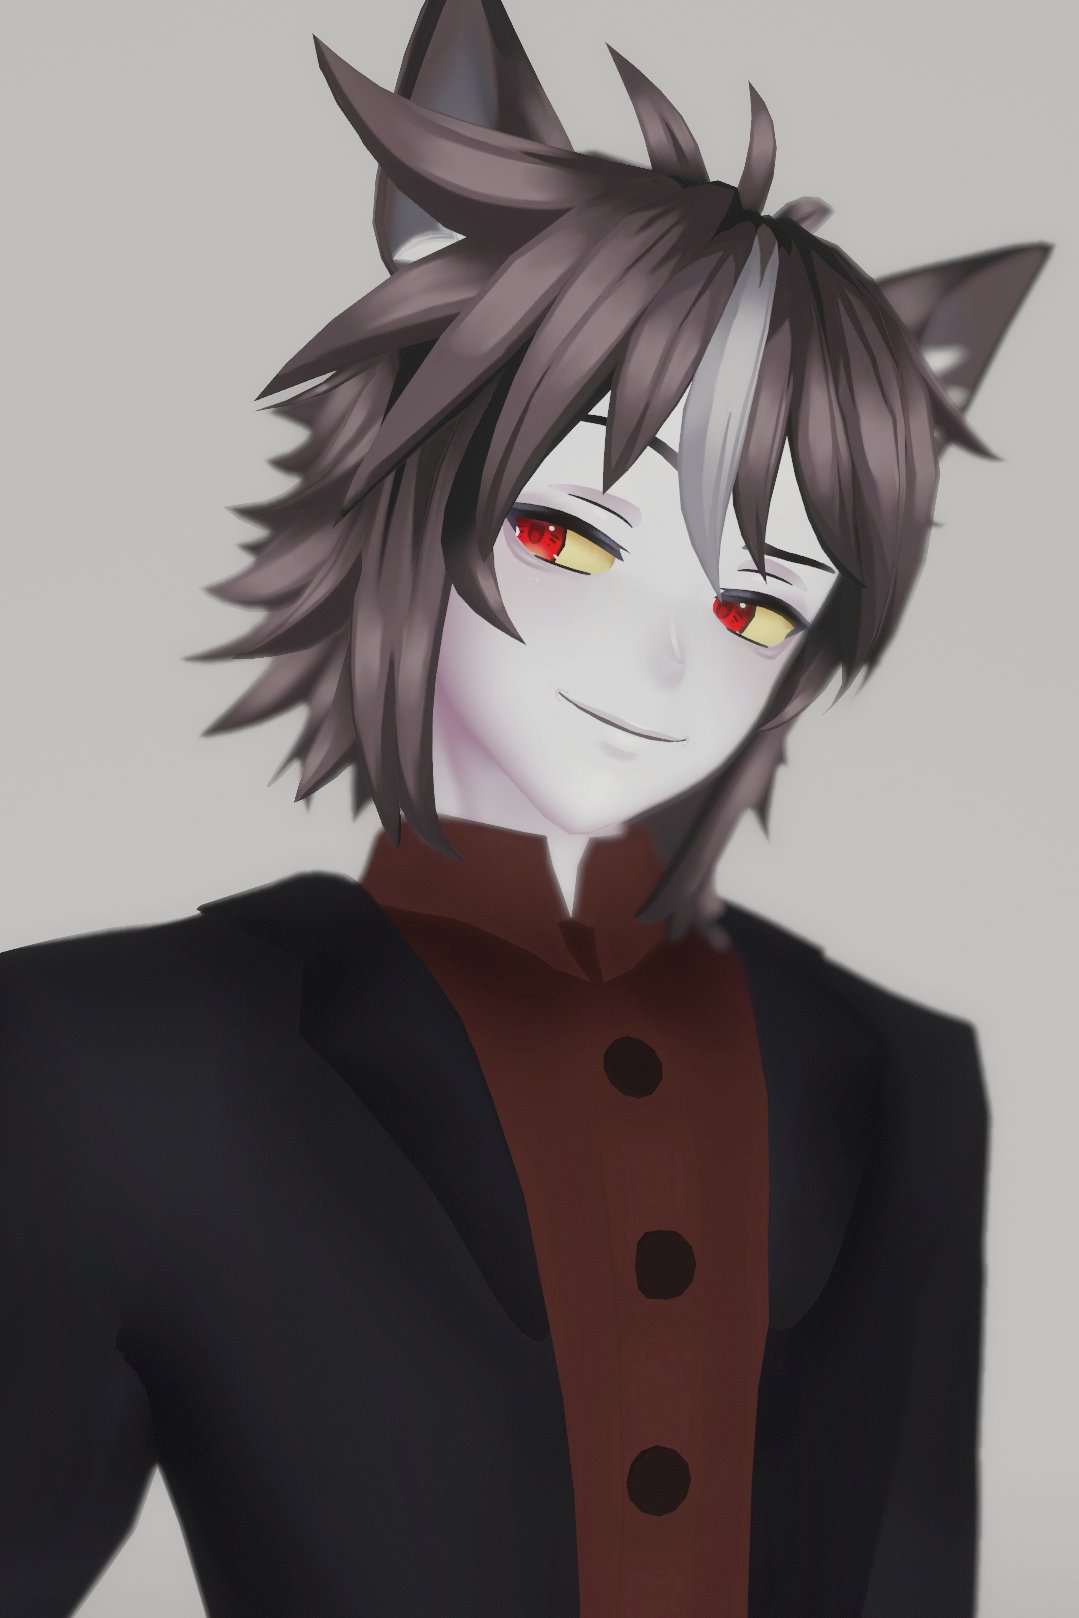 TFMJonny 🐺🎶 Wolfboi Vtuber on X: while I'm waiting for the  video  to reupload, let me know what you think  / X